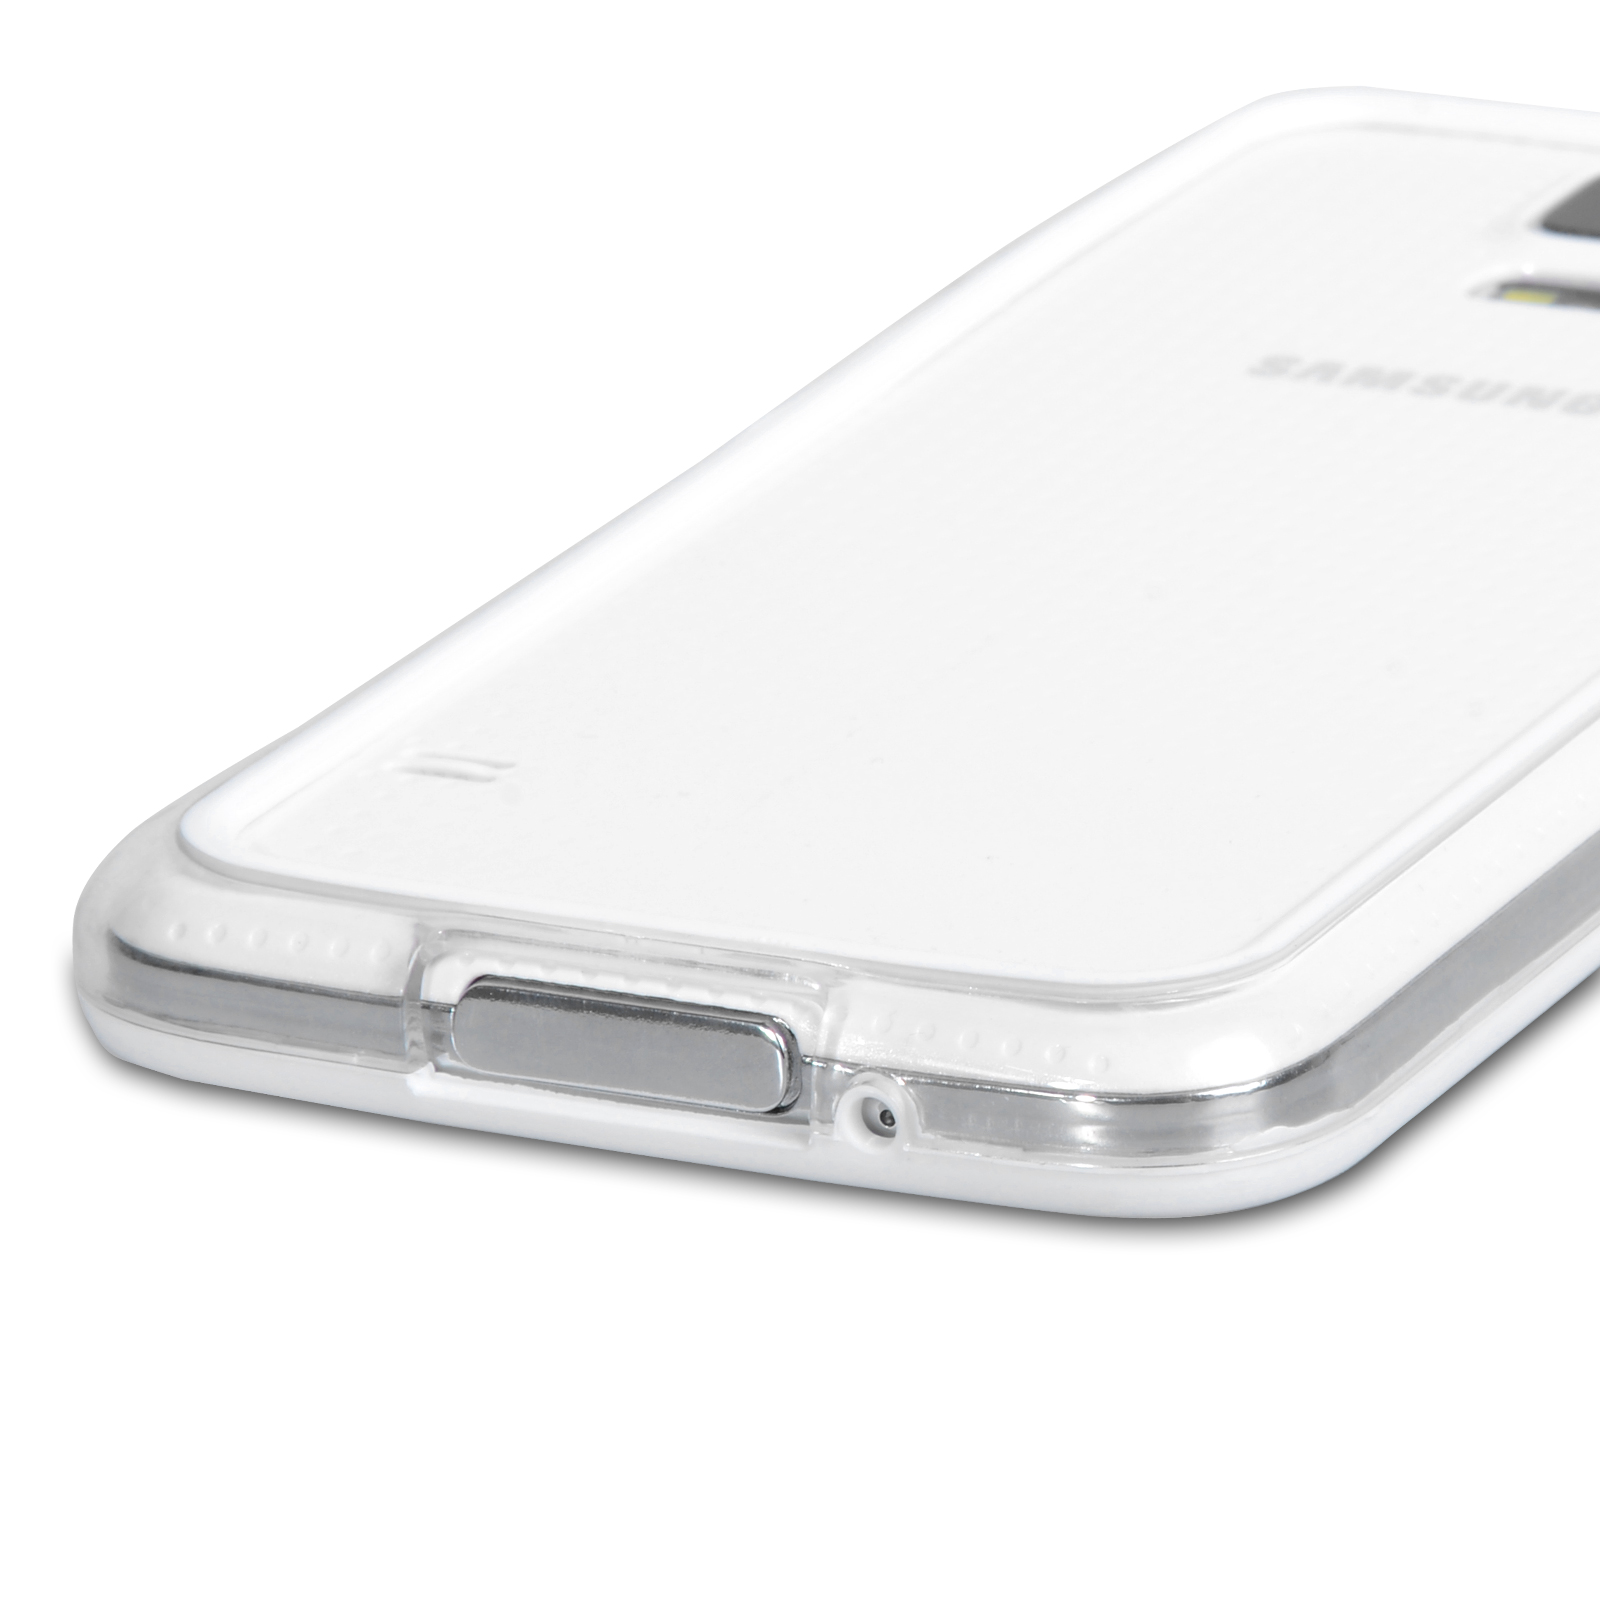 YouSave Accessories Samsung Galaxy S5 Bumper Case - Clear/White